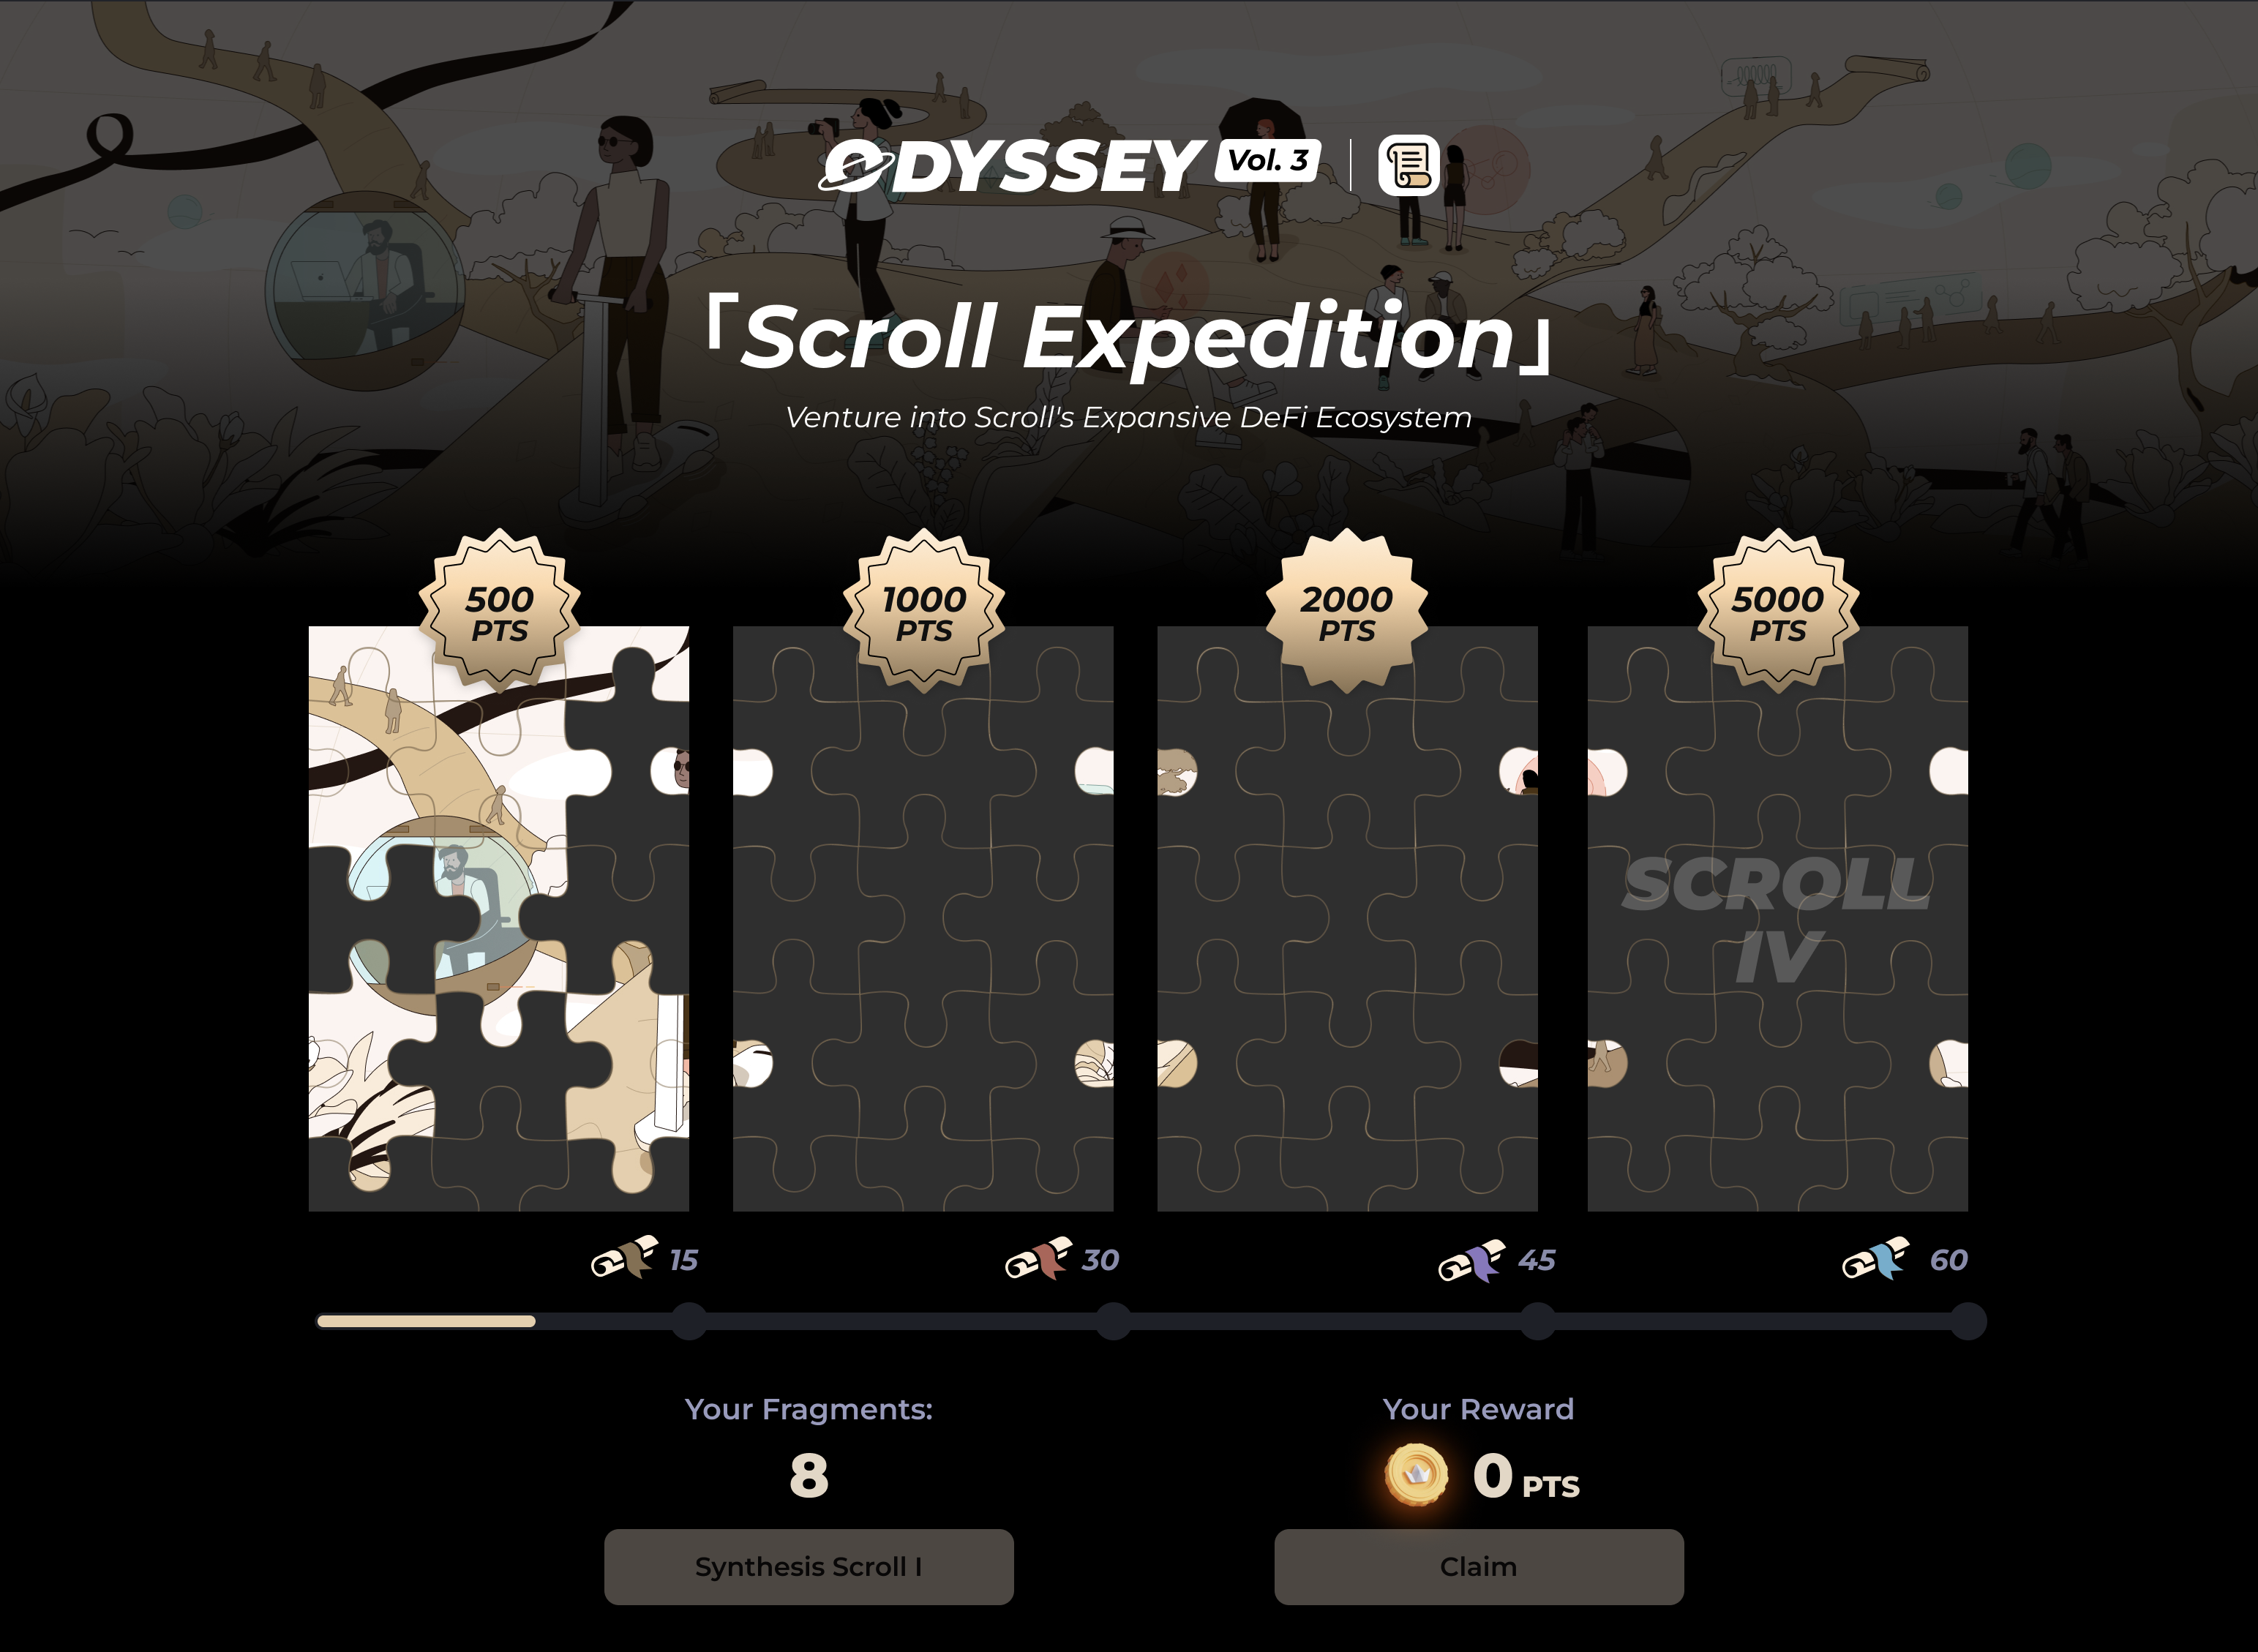 Venture into Scroll's Expansive DeFi Ecosystem with Odyssey Vol. 3